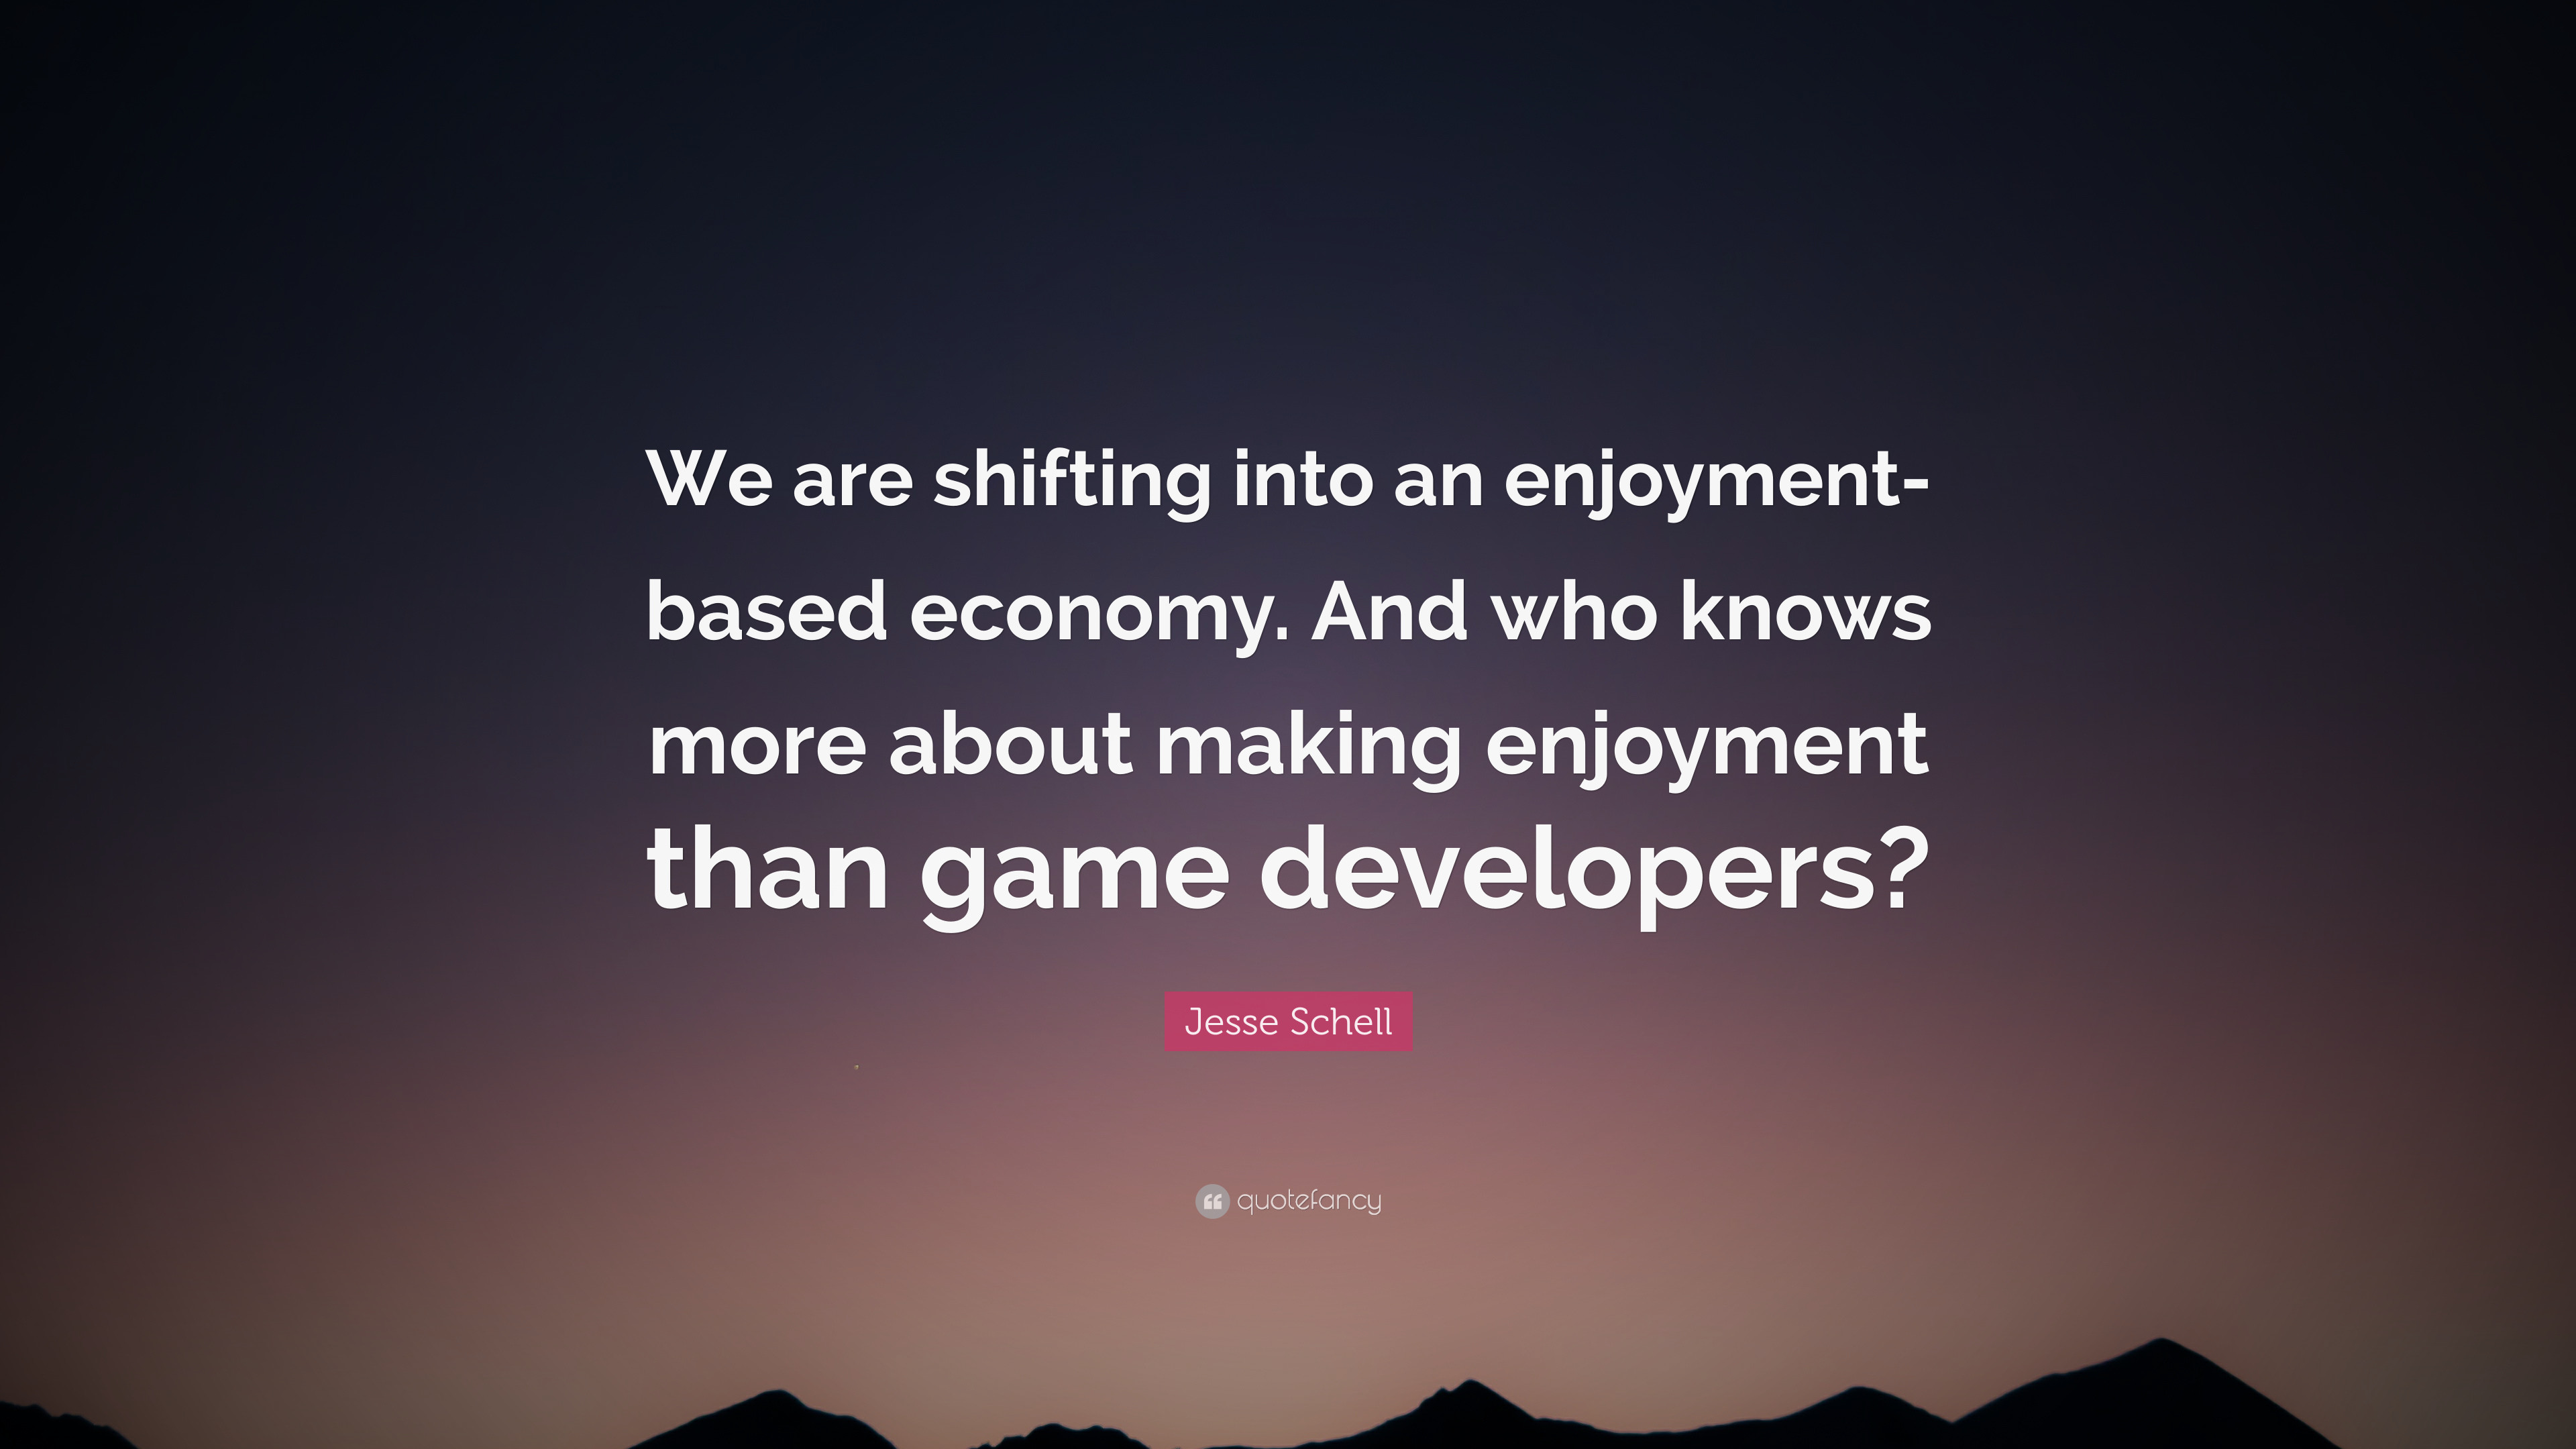 3840x2160 Jesse Schell Quote: “We are shifting into an enjoyment-based economy. And